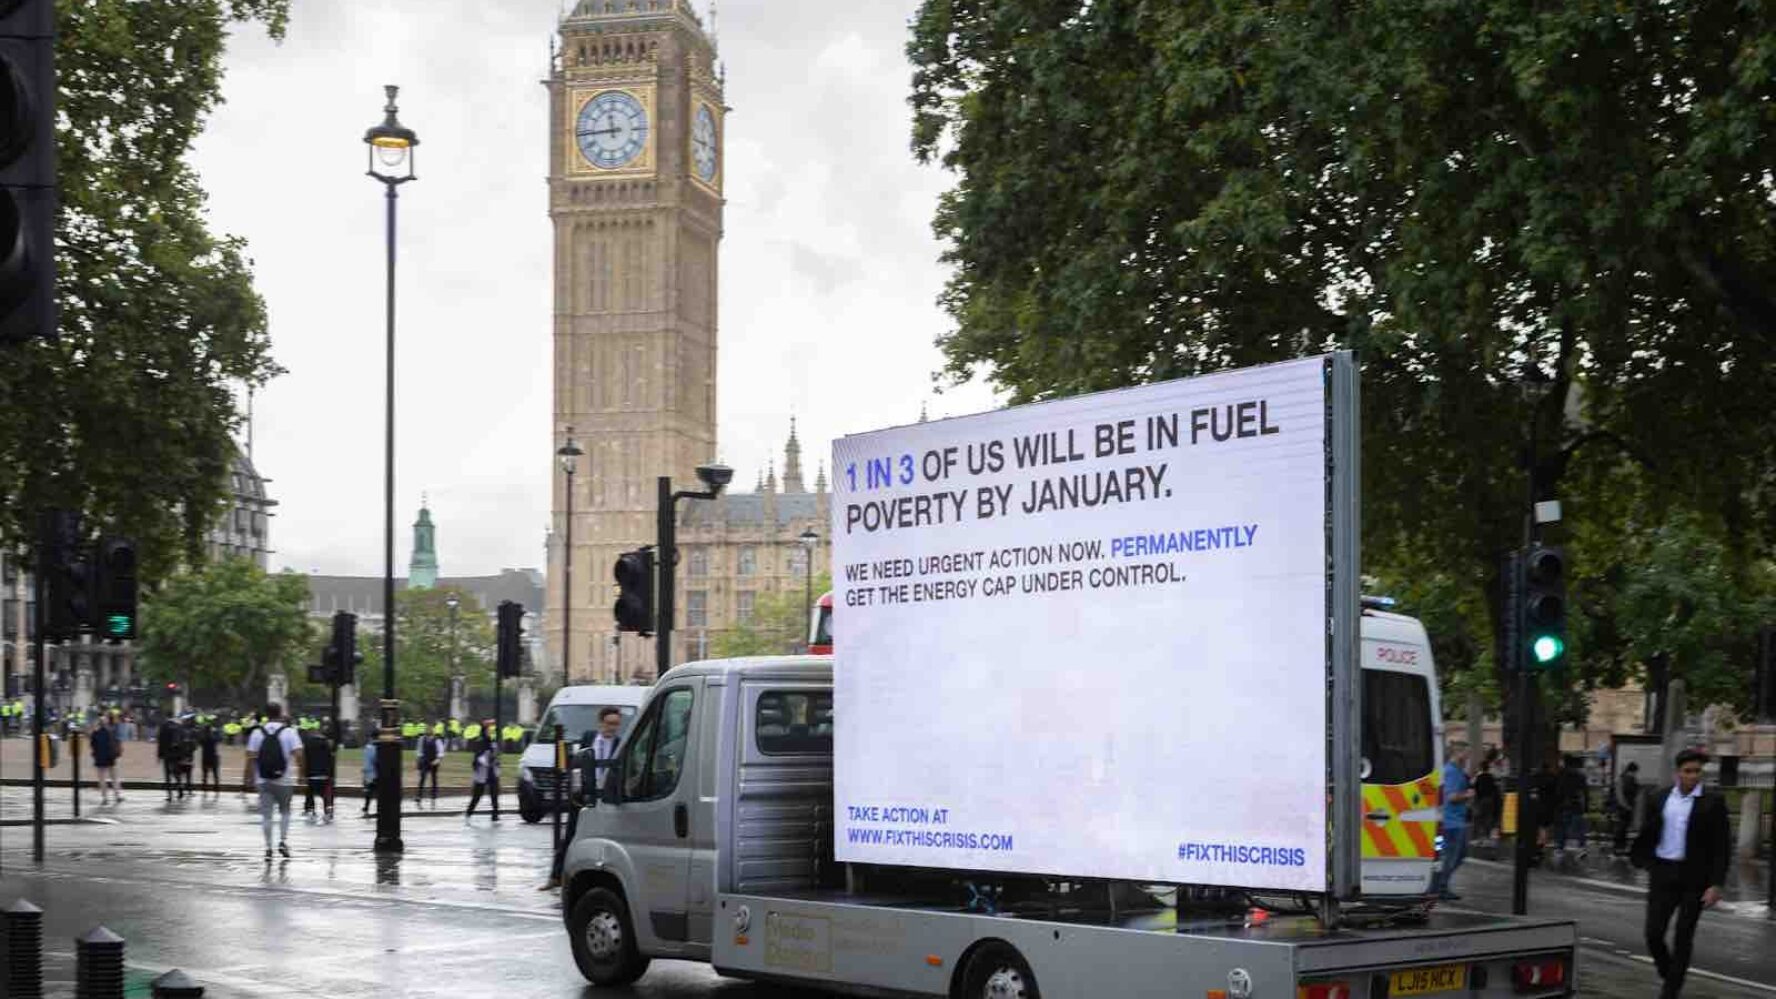 A mobile billboard on a van driving past the Houses of Parliament that says '1 in 3 of us will be in fuel poverty by January'